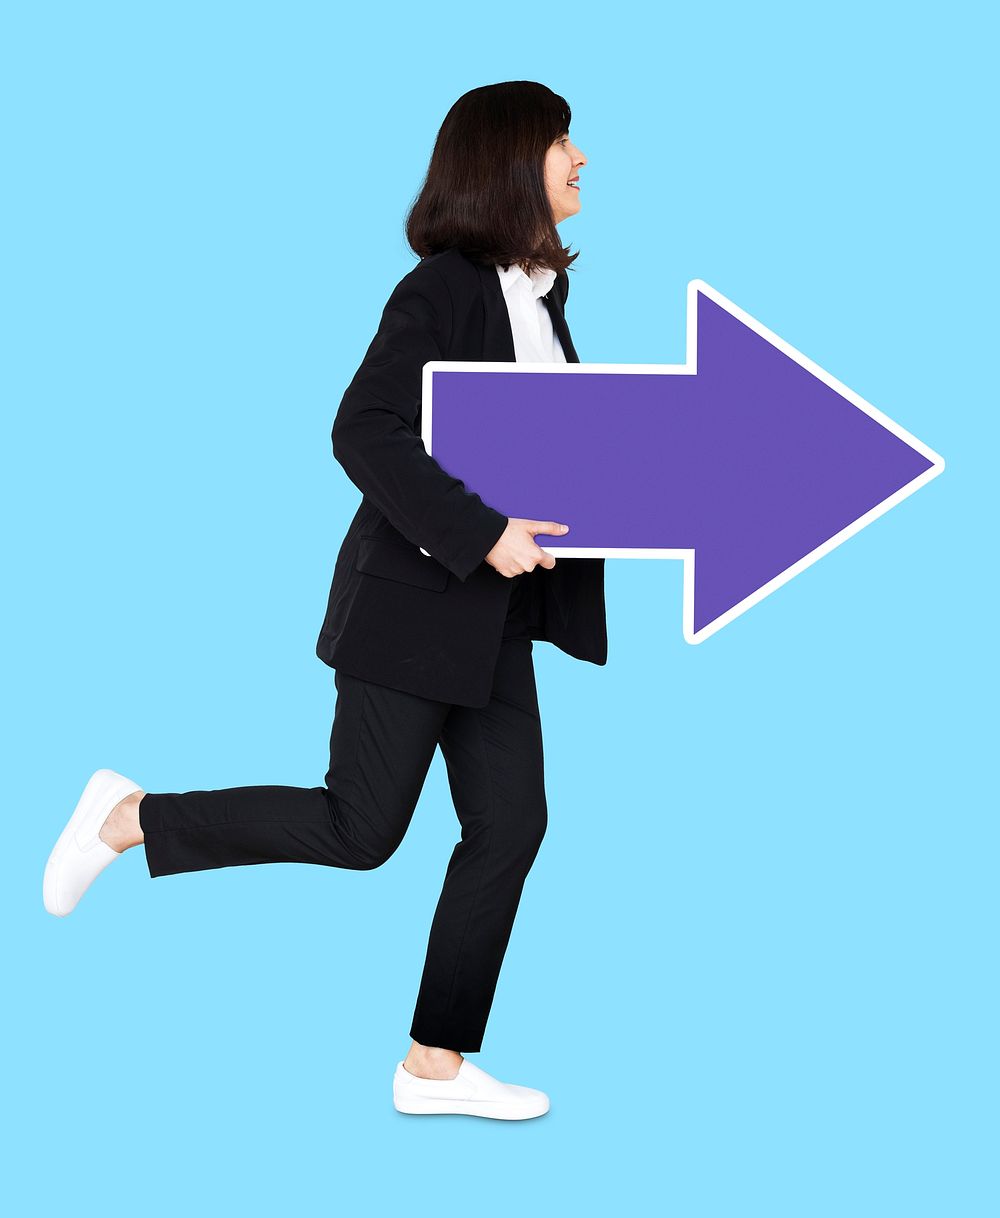 Cheerful businesswoman running with a purple arrow